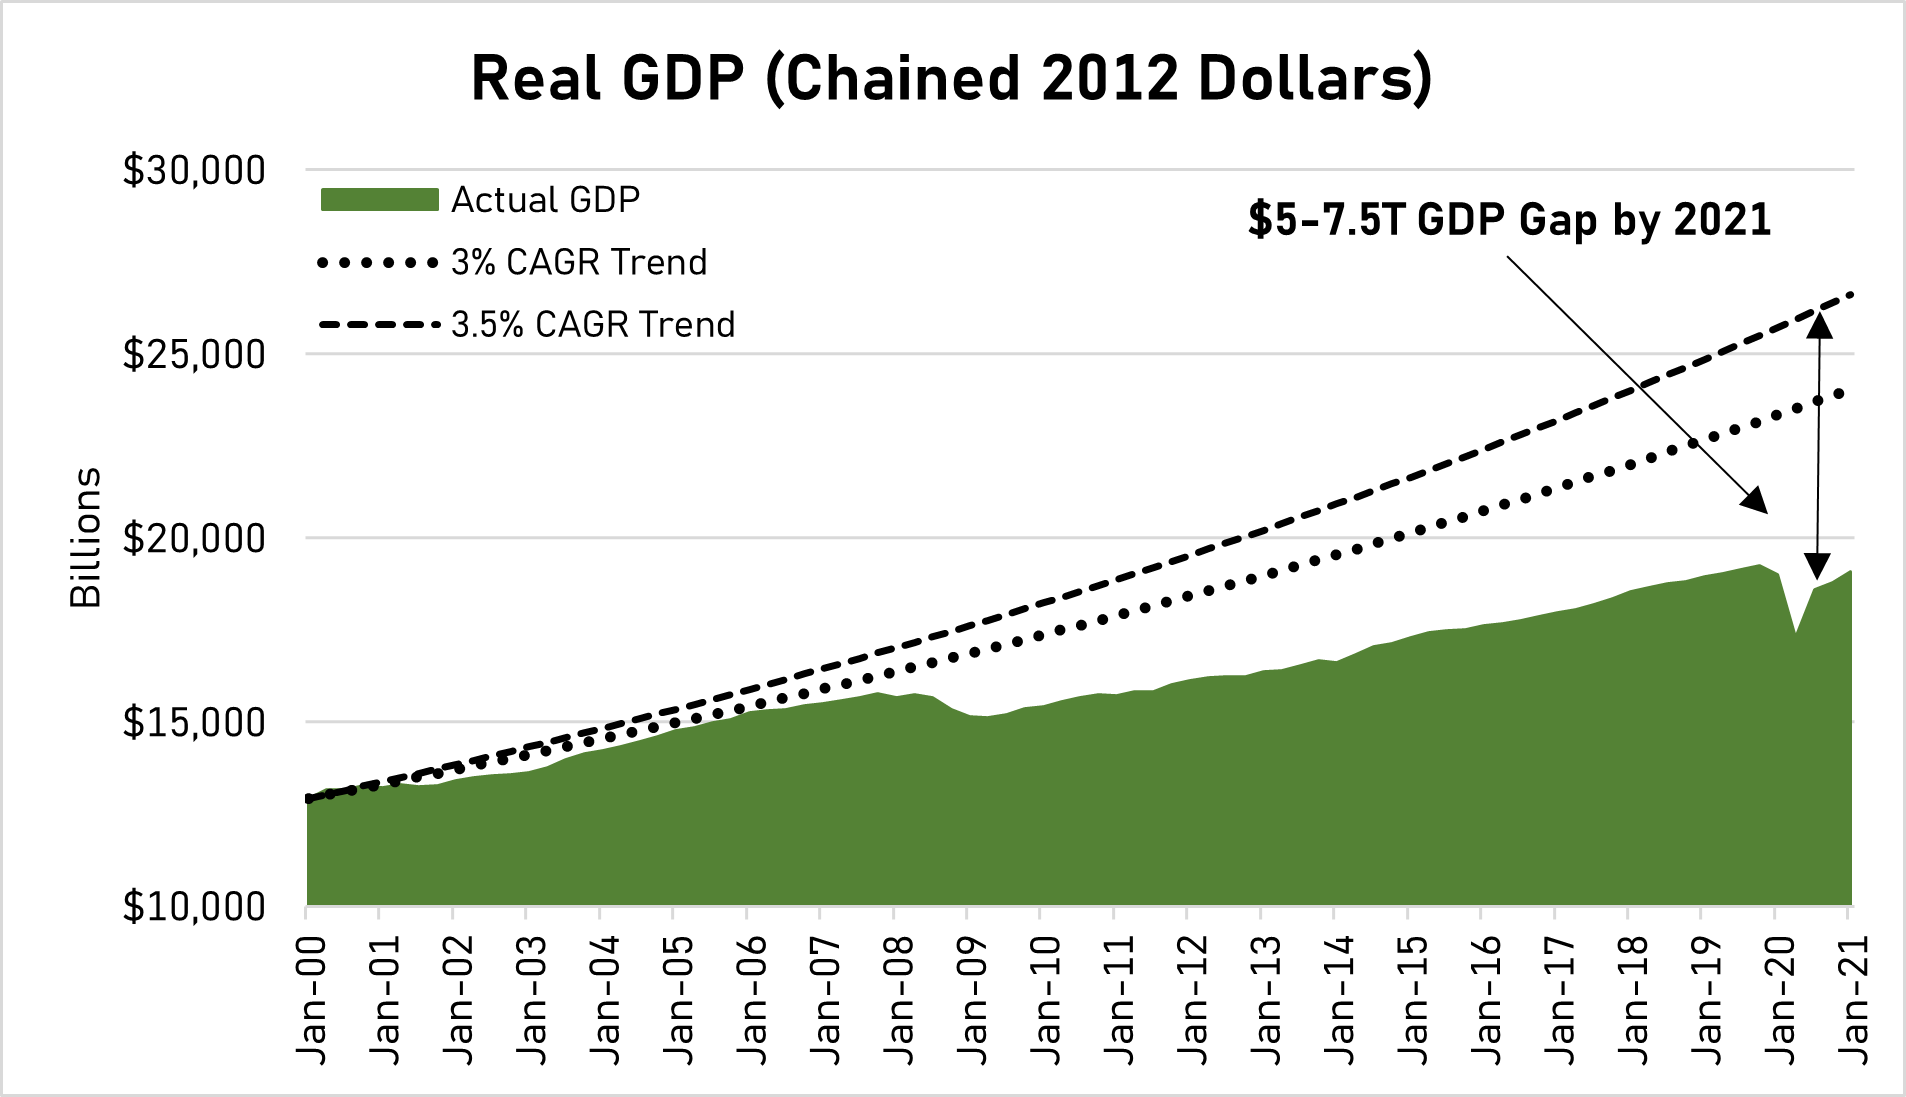 GDP Potential